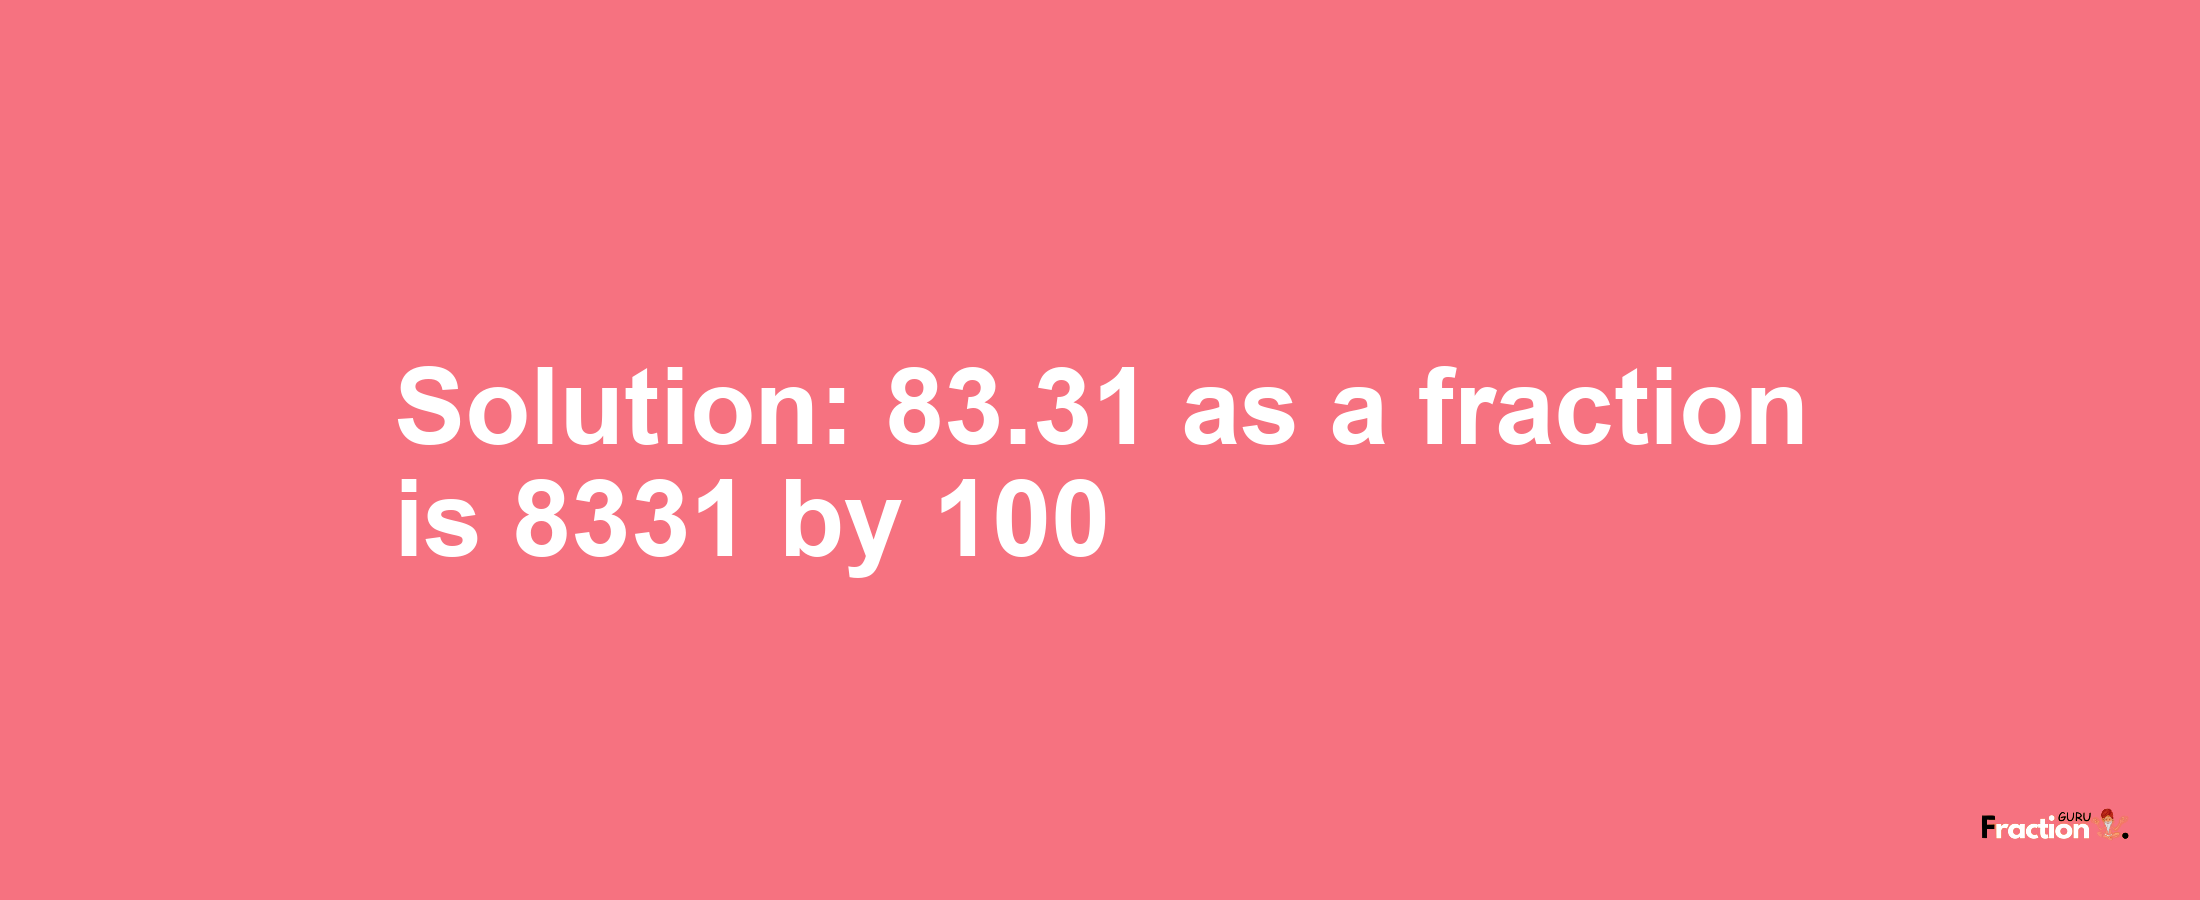 Solution:83.31 as a fraction is 8331/100